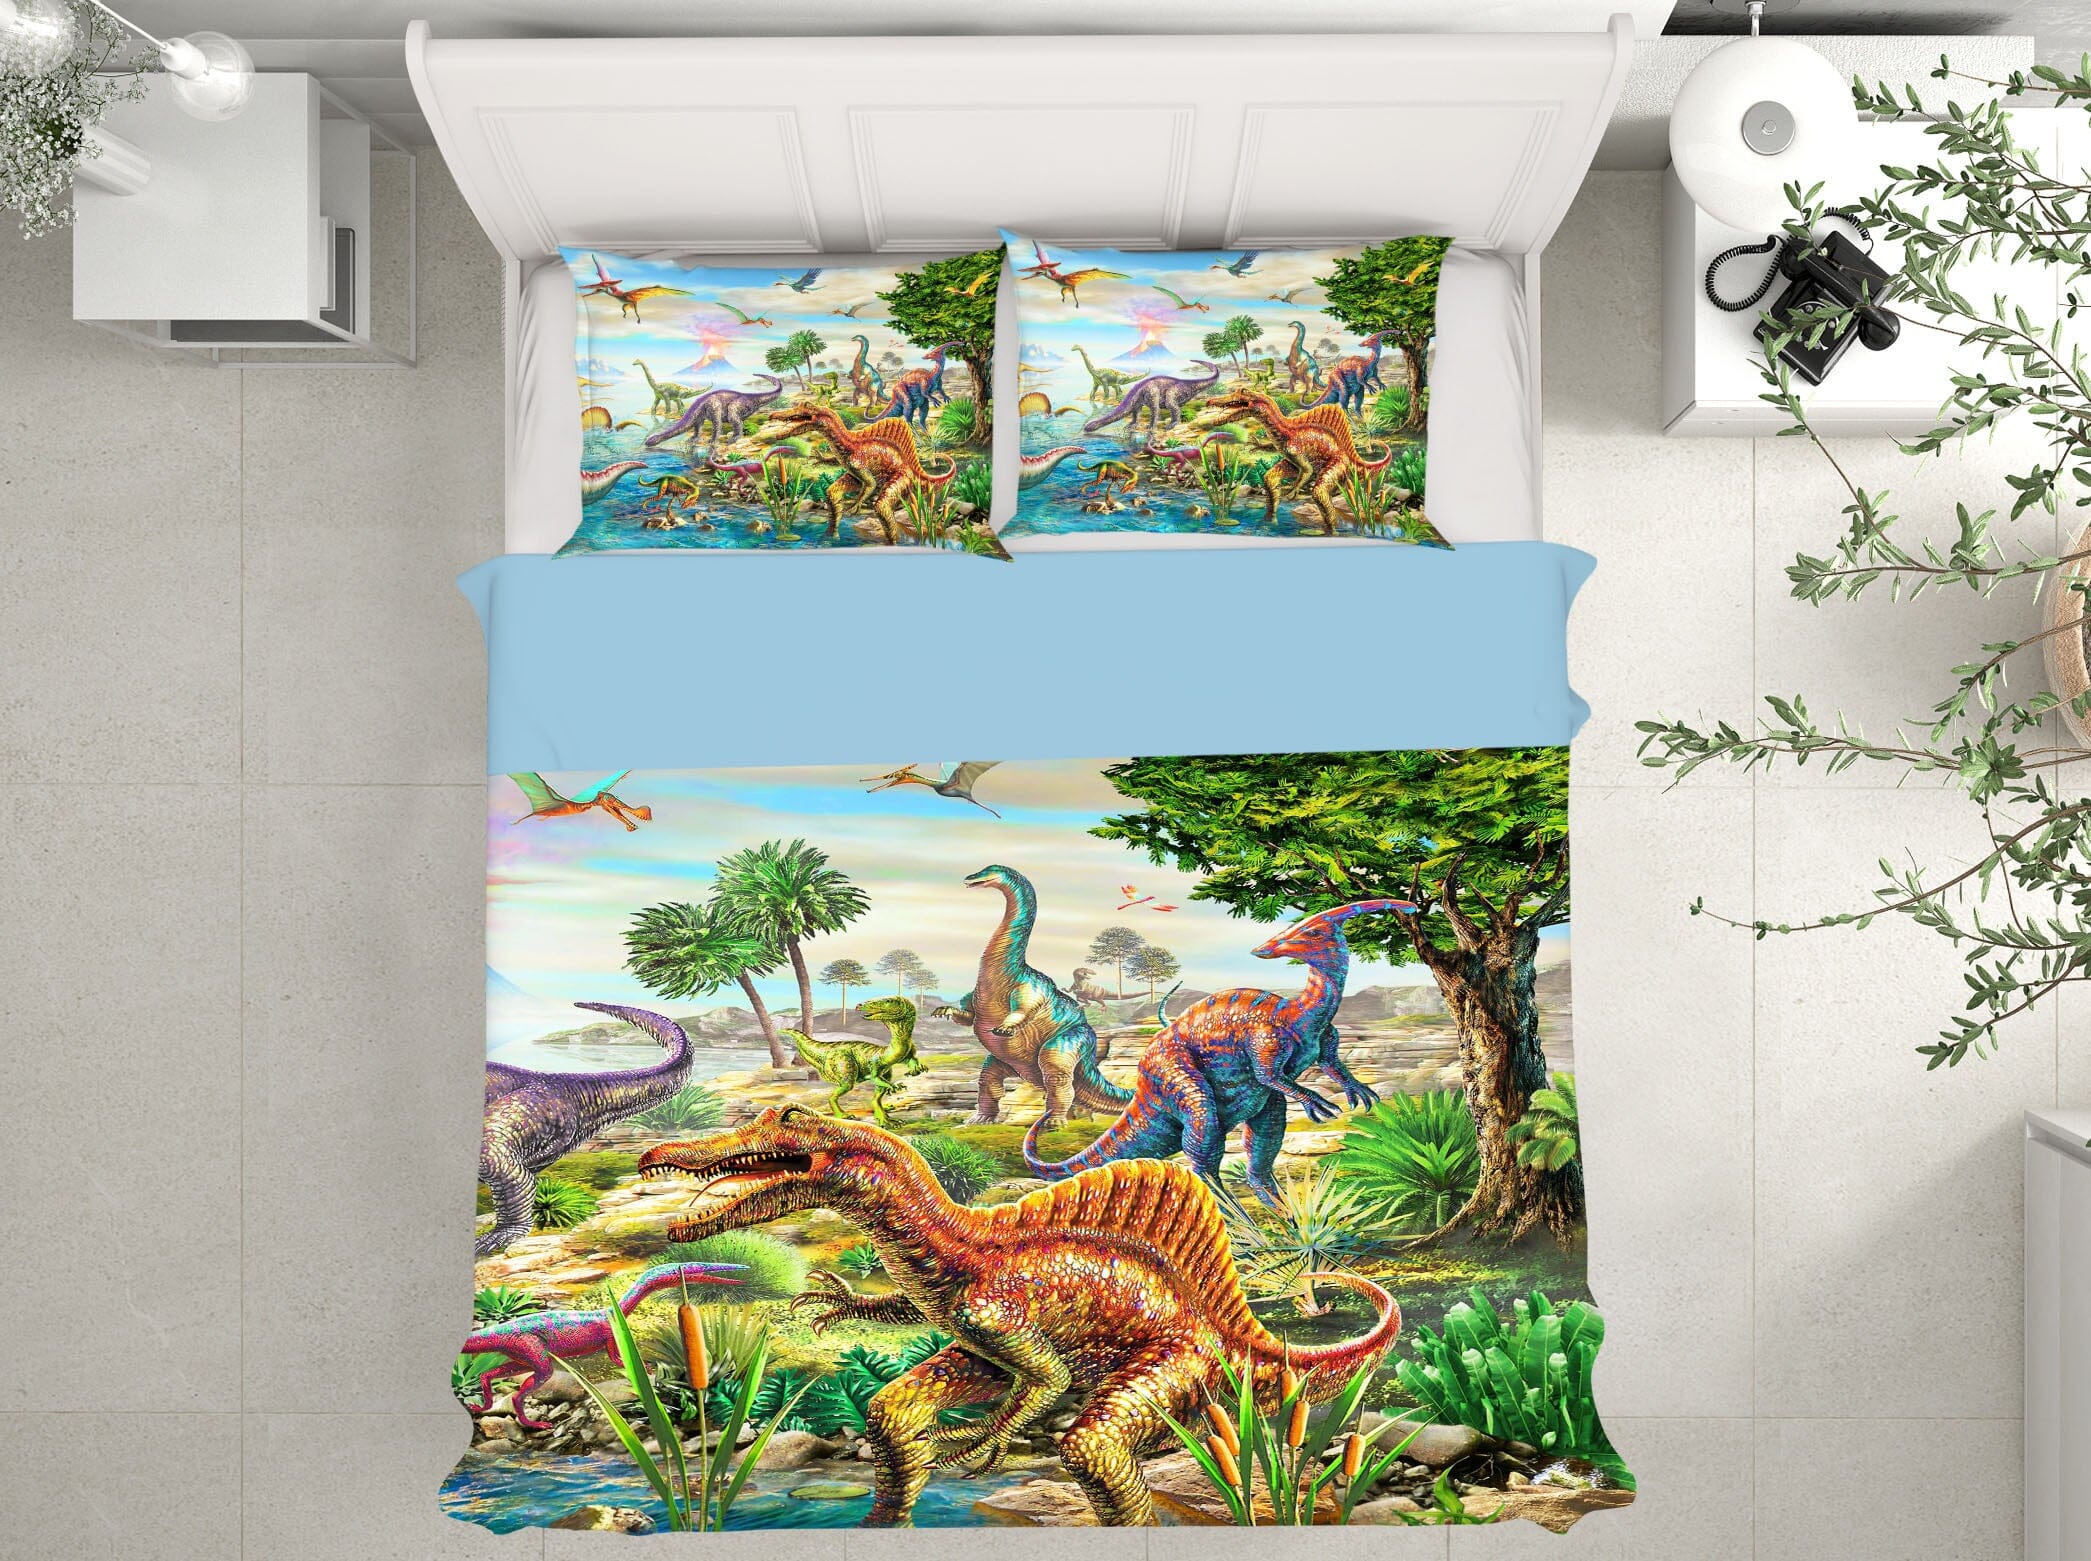 3D Dinosaur Forest 2124 Adrian Chesterman Bedding Bed Pillowcases Quilt Quiet Covers AJ Creativity Home 